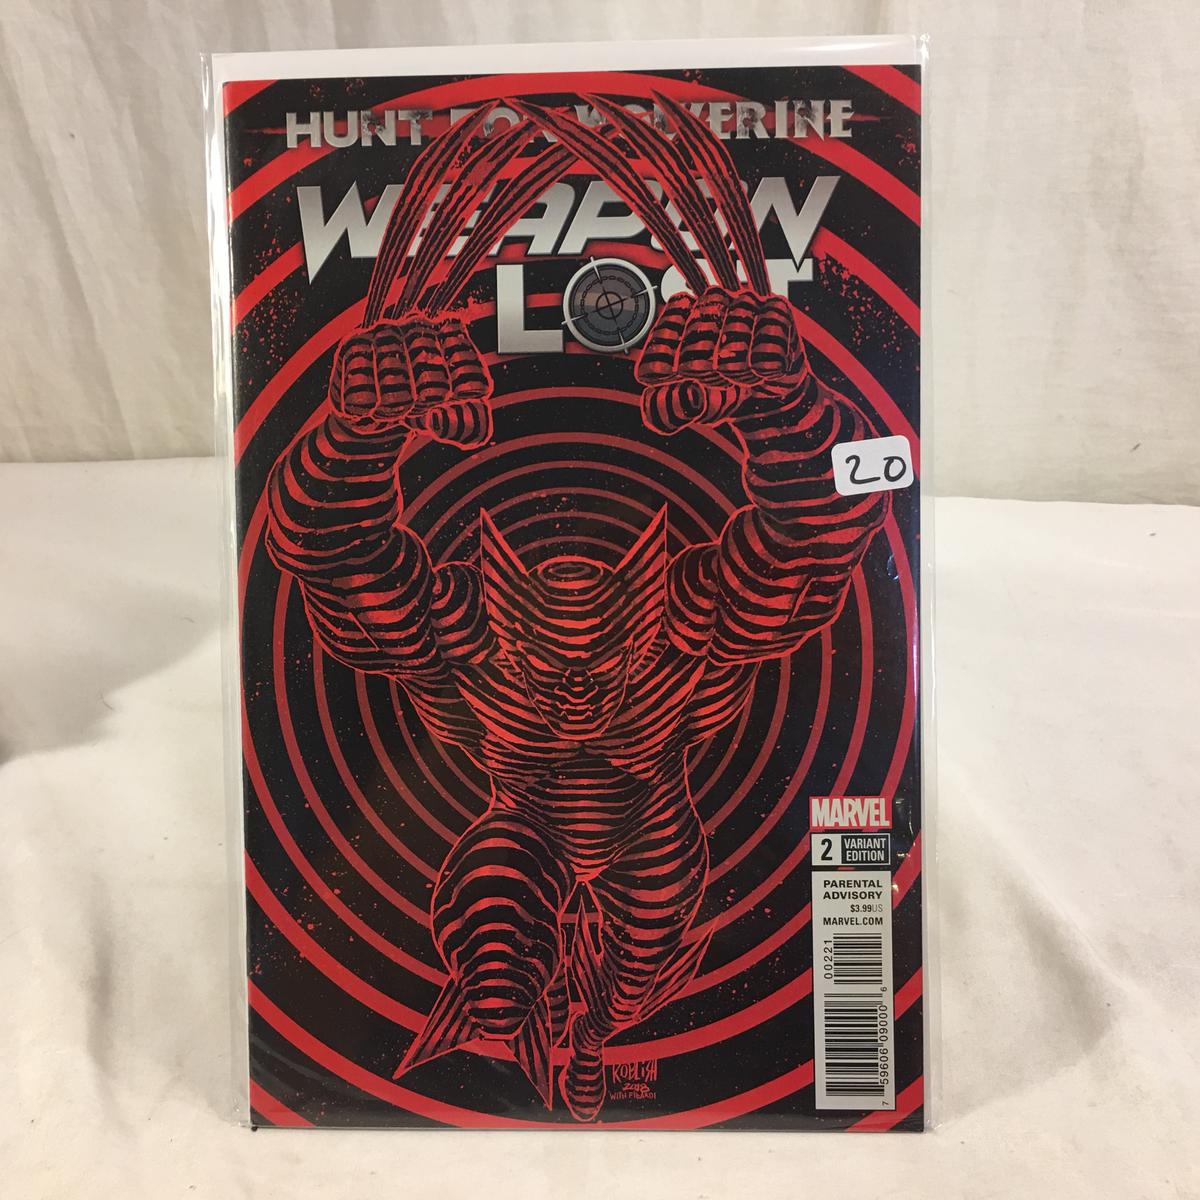 Collector Marvel Comic Book Hunt For Wolverine #2 Variant Edition Weapon Lost Comic Book